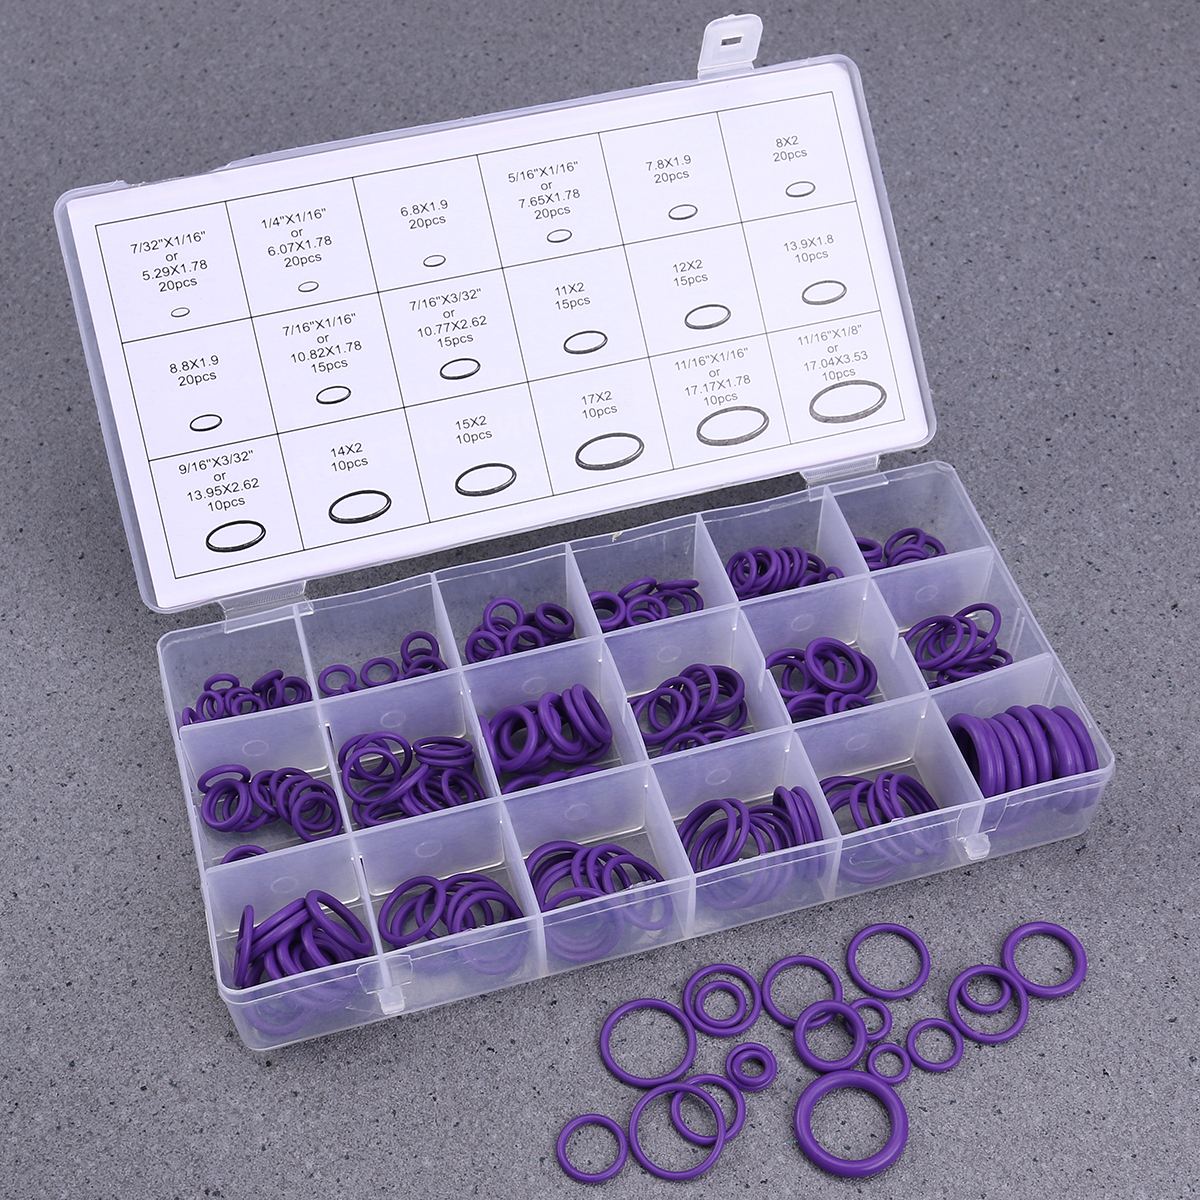 270pcs 18 Sizes O Ring Rubber Insulation Gasket Washer Seals Tool Car Air Conditioning Compressor Seals Car Repair tools A20